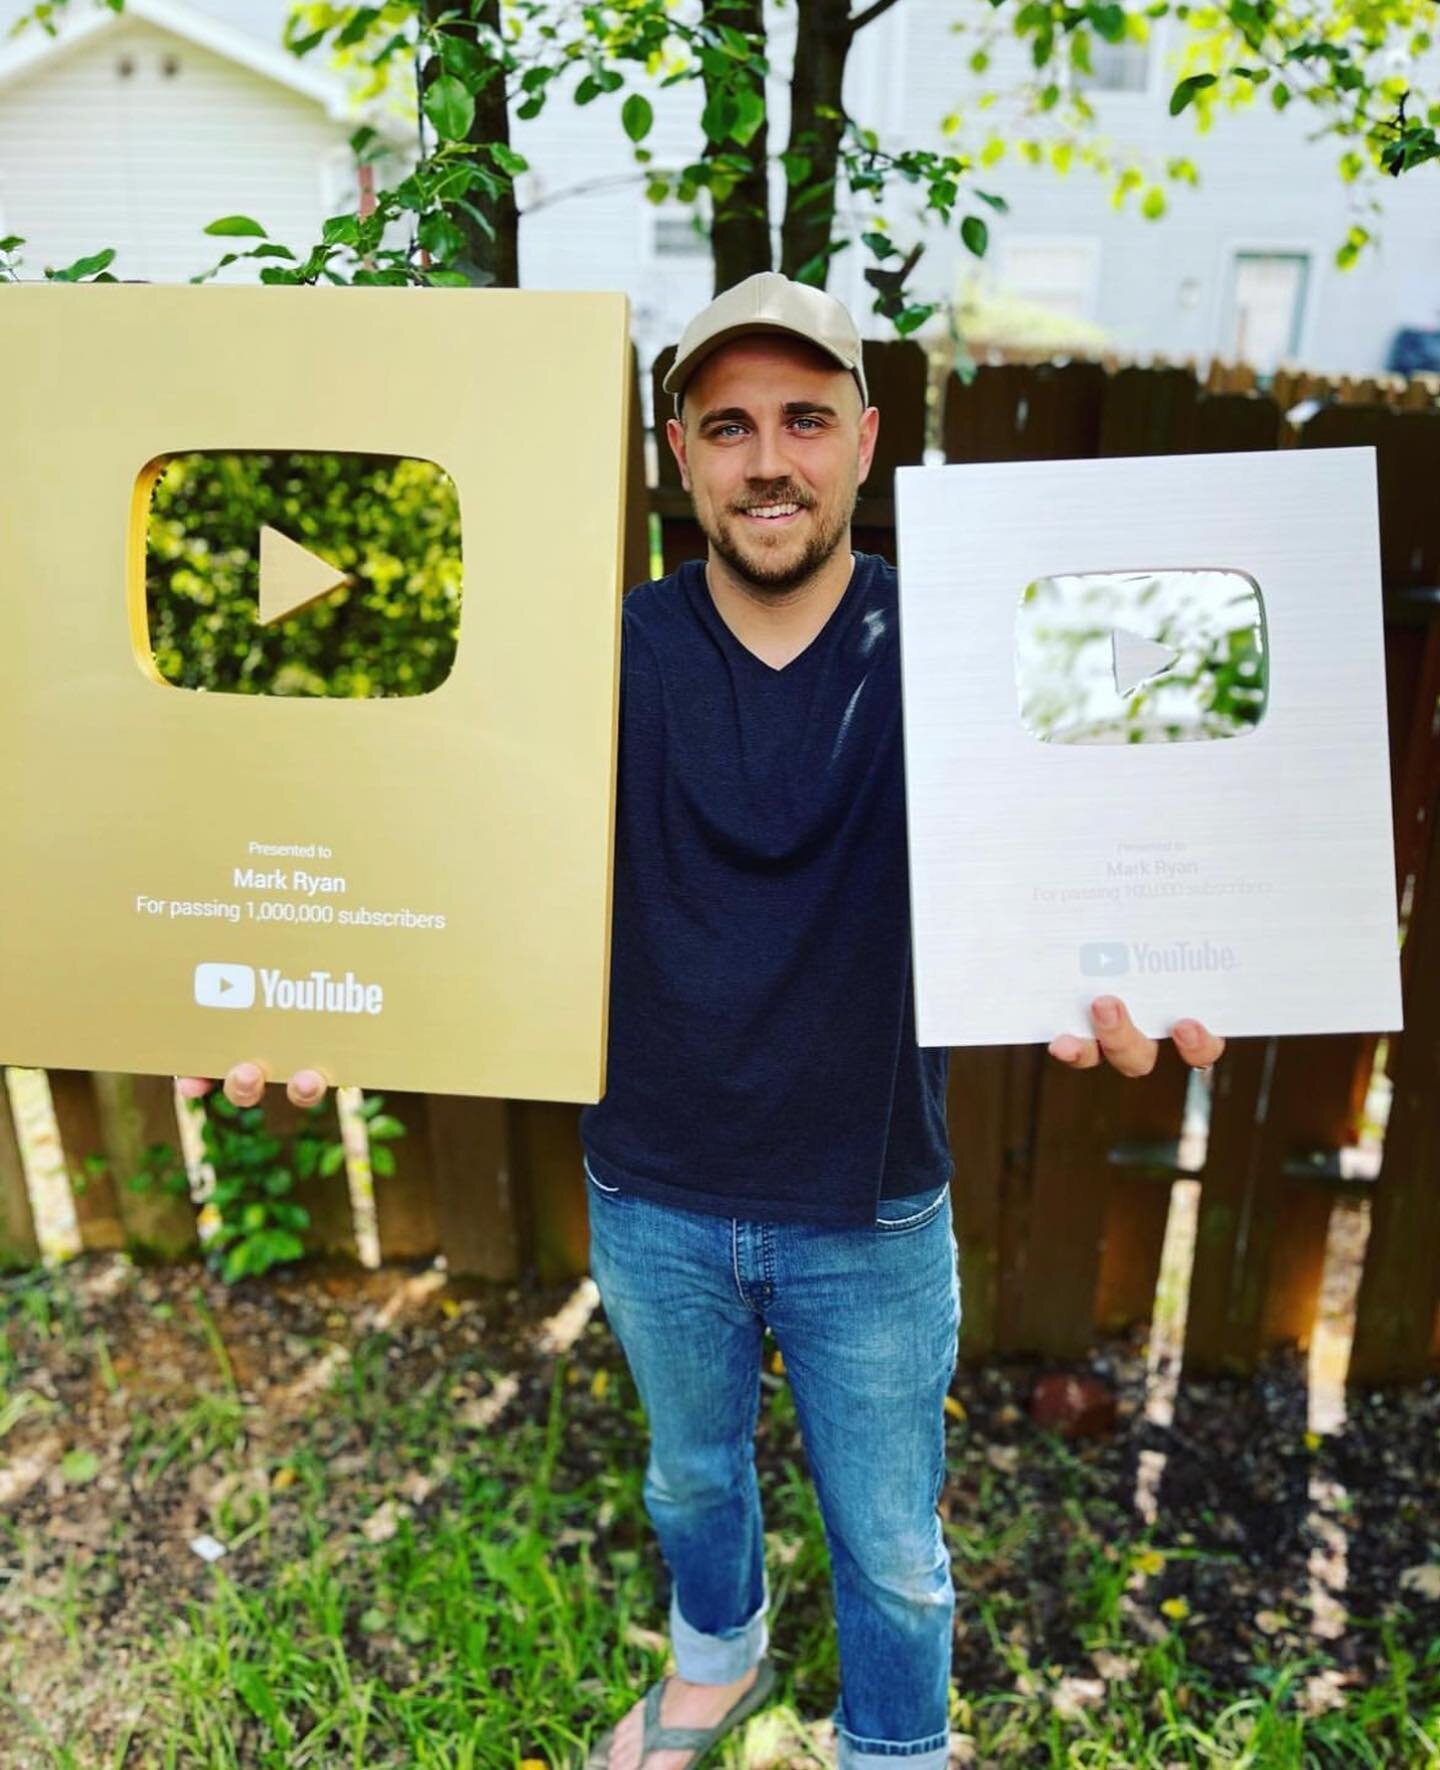 Congrats to @markryan_92 on one MILLION YouTube subscribers! That gold plaque is sure lookin' good 🤯

Mark is absolutely crushing it with new YouTube shorts content on the regular, and if you don't check him out...well, you're missing all the fun!

